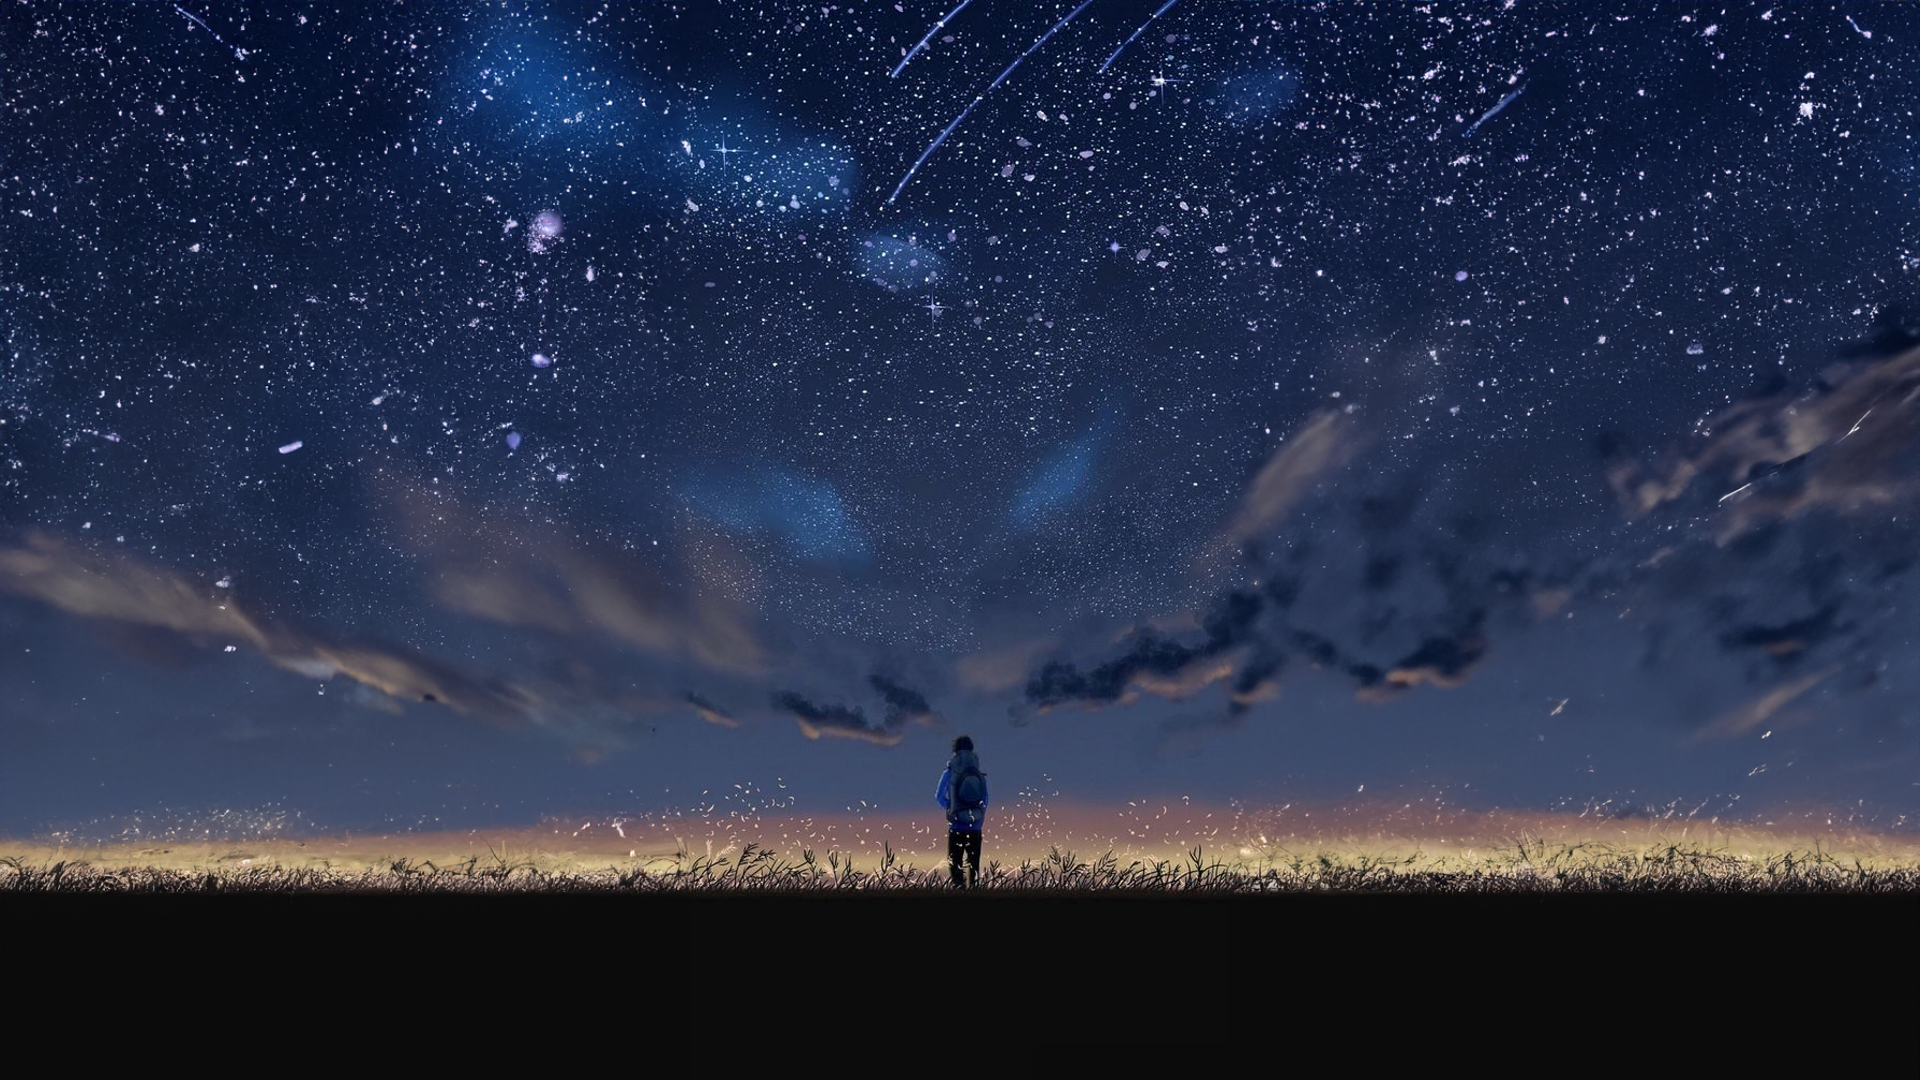 Stars Clouds Grass Shooting Stars Standing Night Backpacks Looking Into The Distance Sky 1920x1080